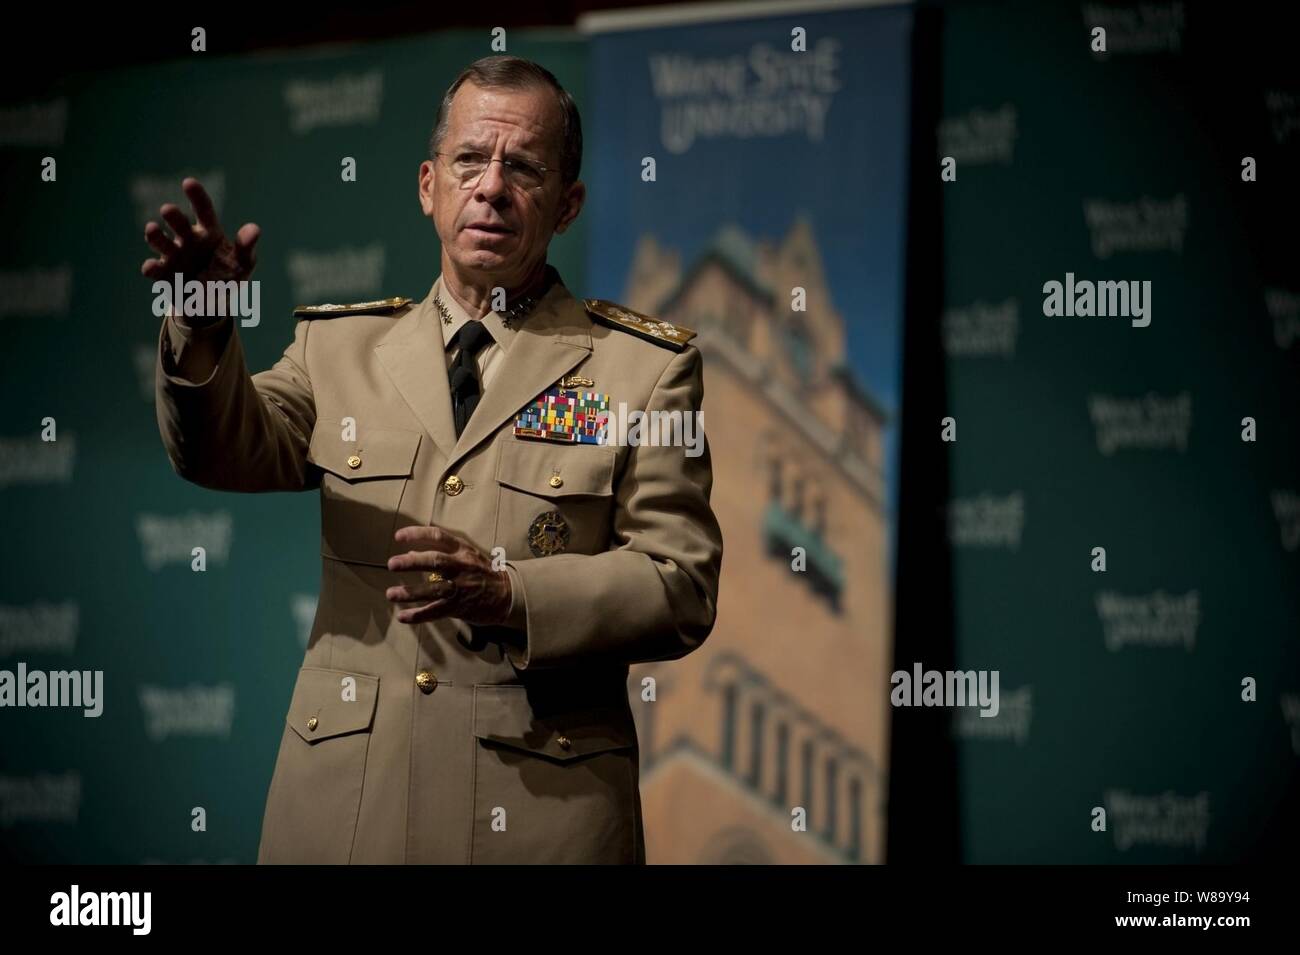 Chairman of the Joint Chiefs of Staff Adm. Mike Mullen, U.S. Navy, addresses audience members at Wayne State University in Detroit, Mich., on Aug. 26, 2010.  Mullen is on a three-day Conversation with the Country tour to the Midwest discussing needs of returning troops, their families and how community leaders can support them. Stock Photo